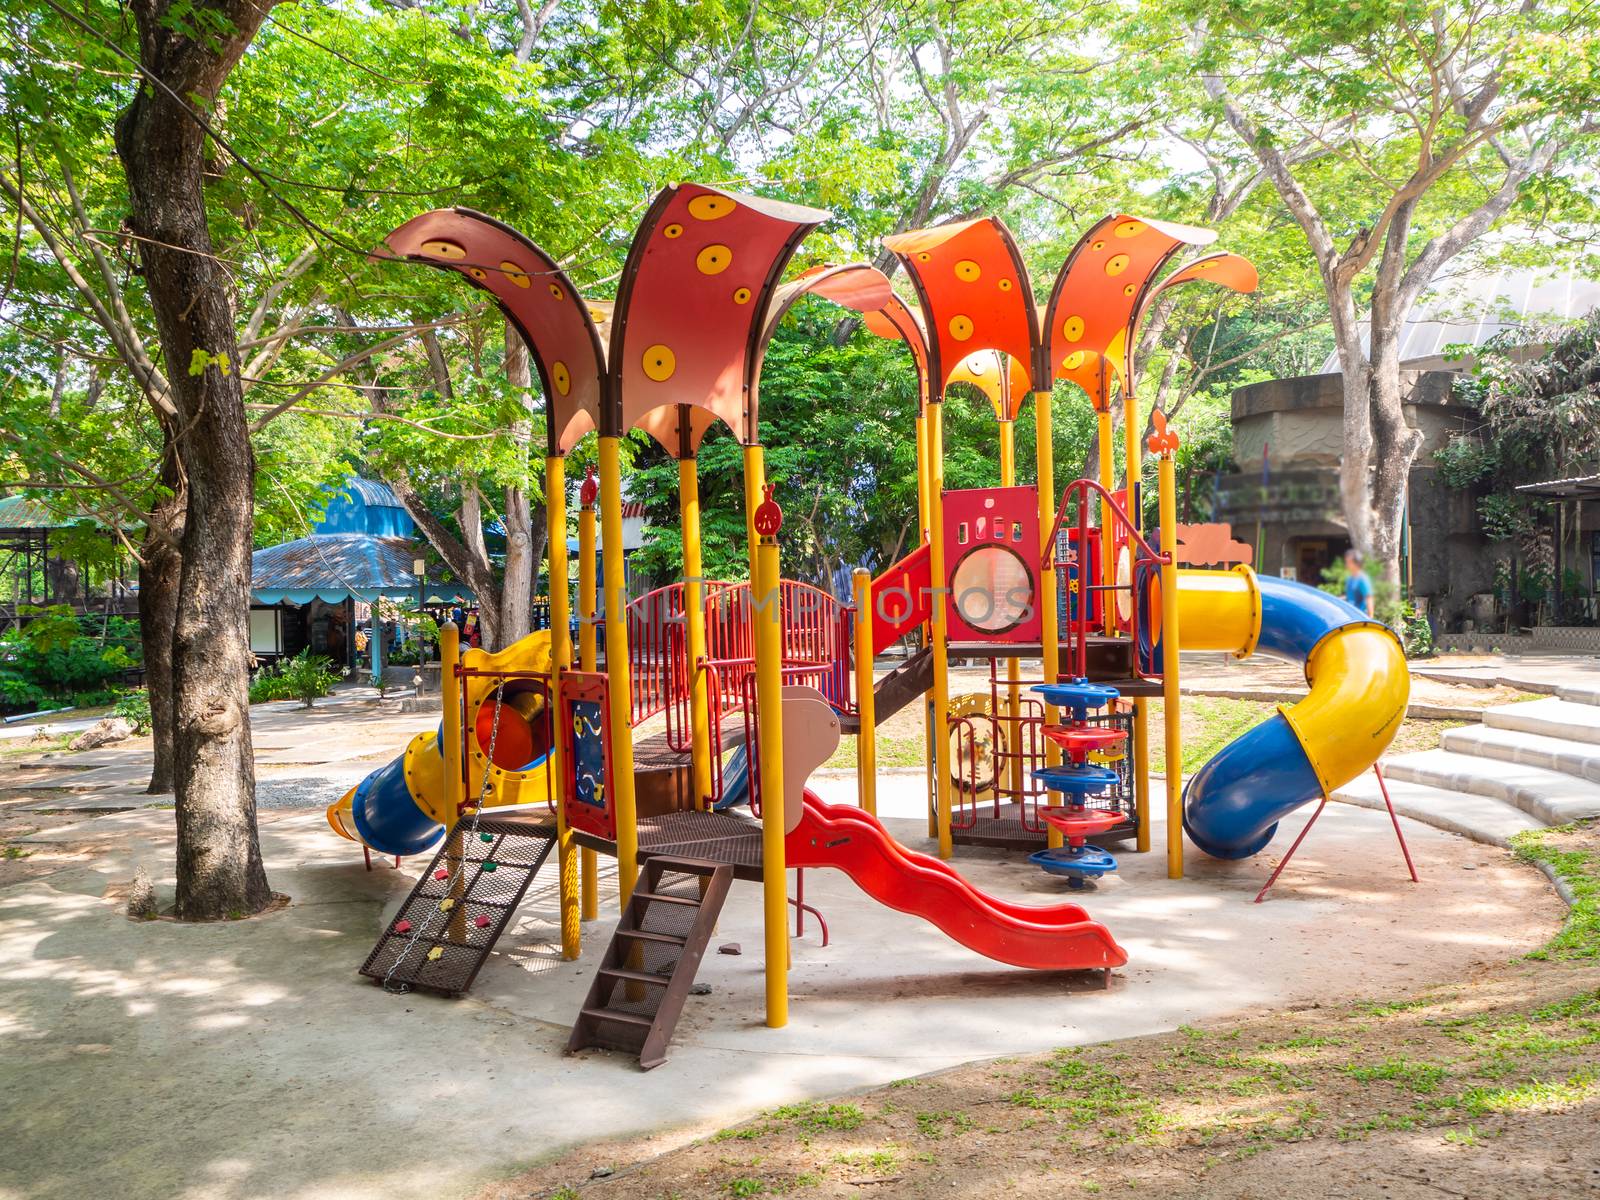 The Colorful playground on yard in the park.